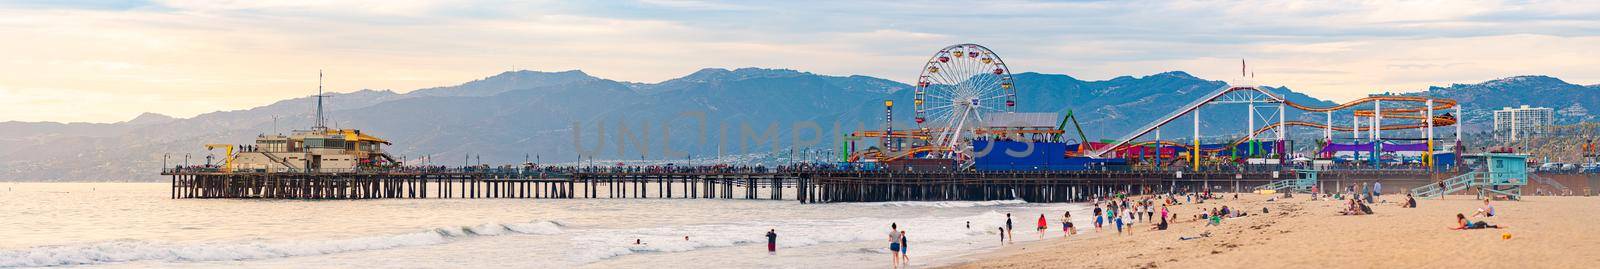 Santa Monica, United States of America - October 24, 2016: panorama of Pacific Park with pier, Ferris wheel, beach, ocean and mountains at sunset.